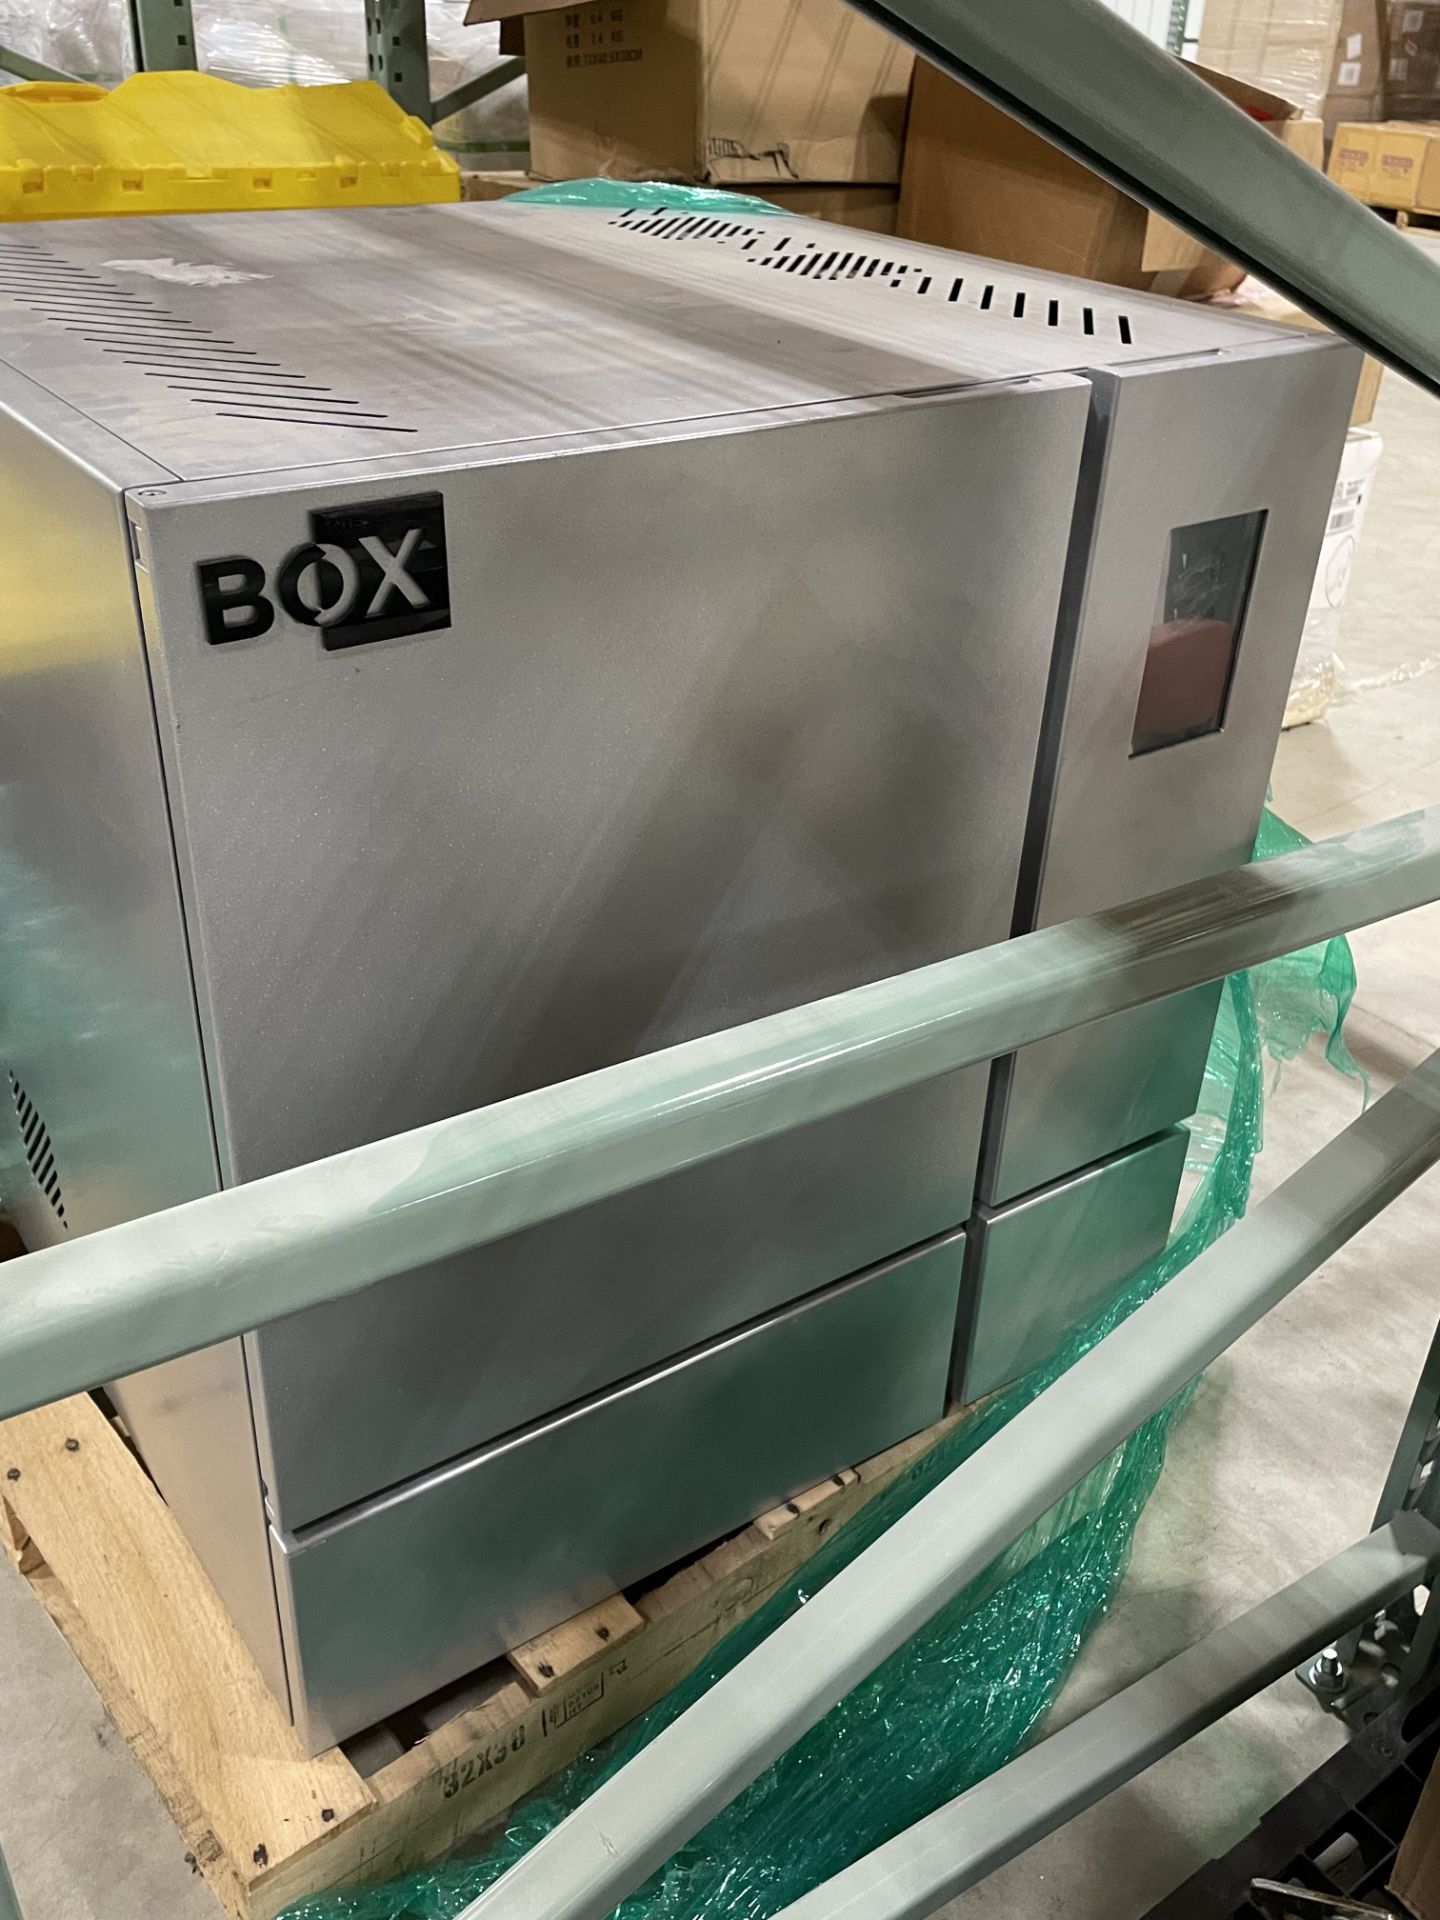 Used Green Broz The Box Organic Mold Remediation System. Model "The Box"